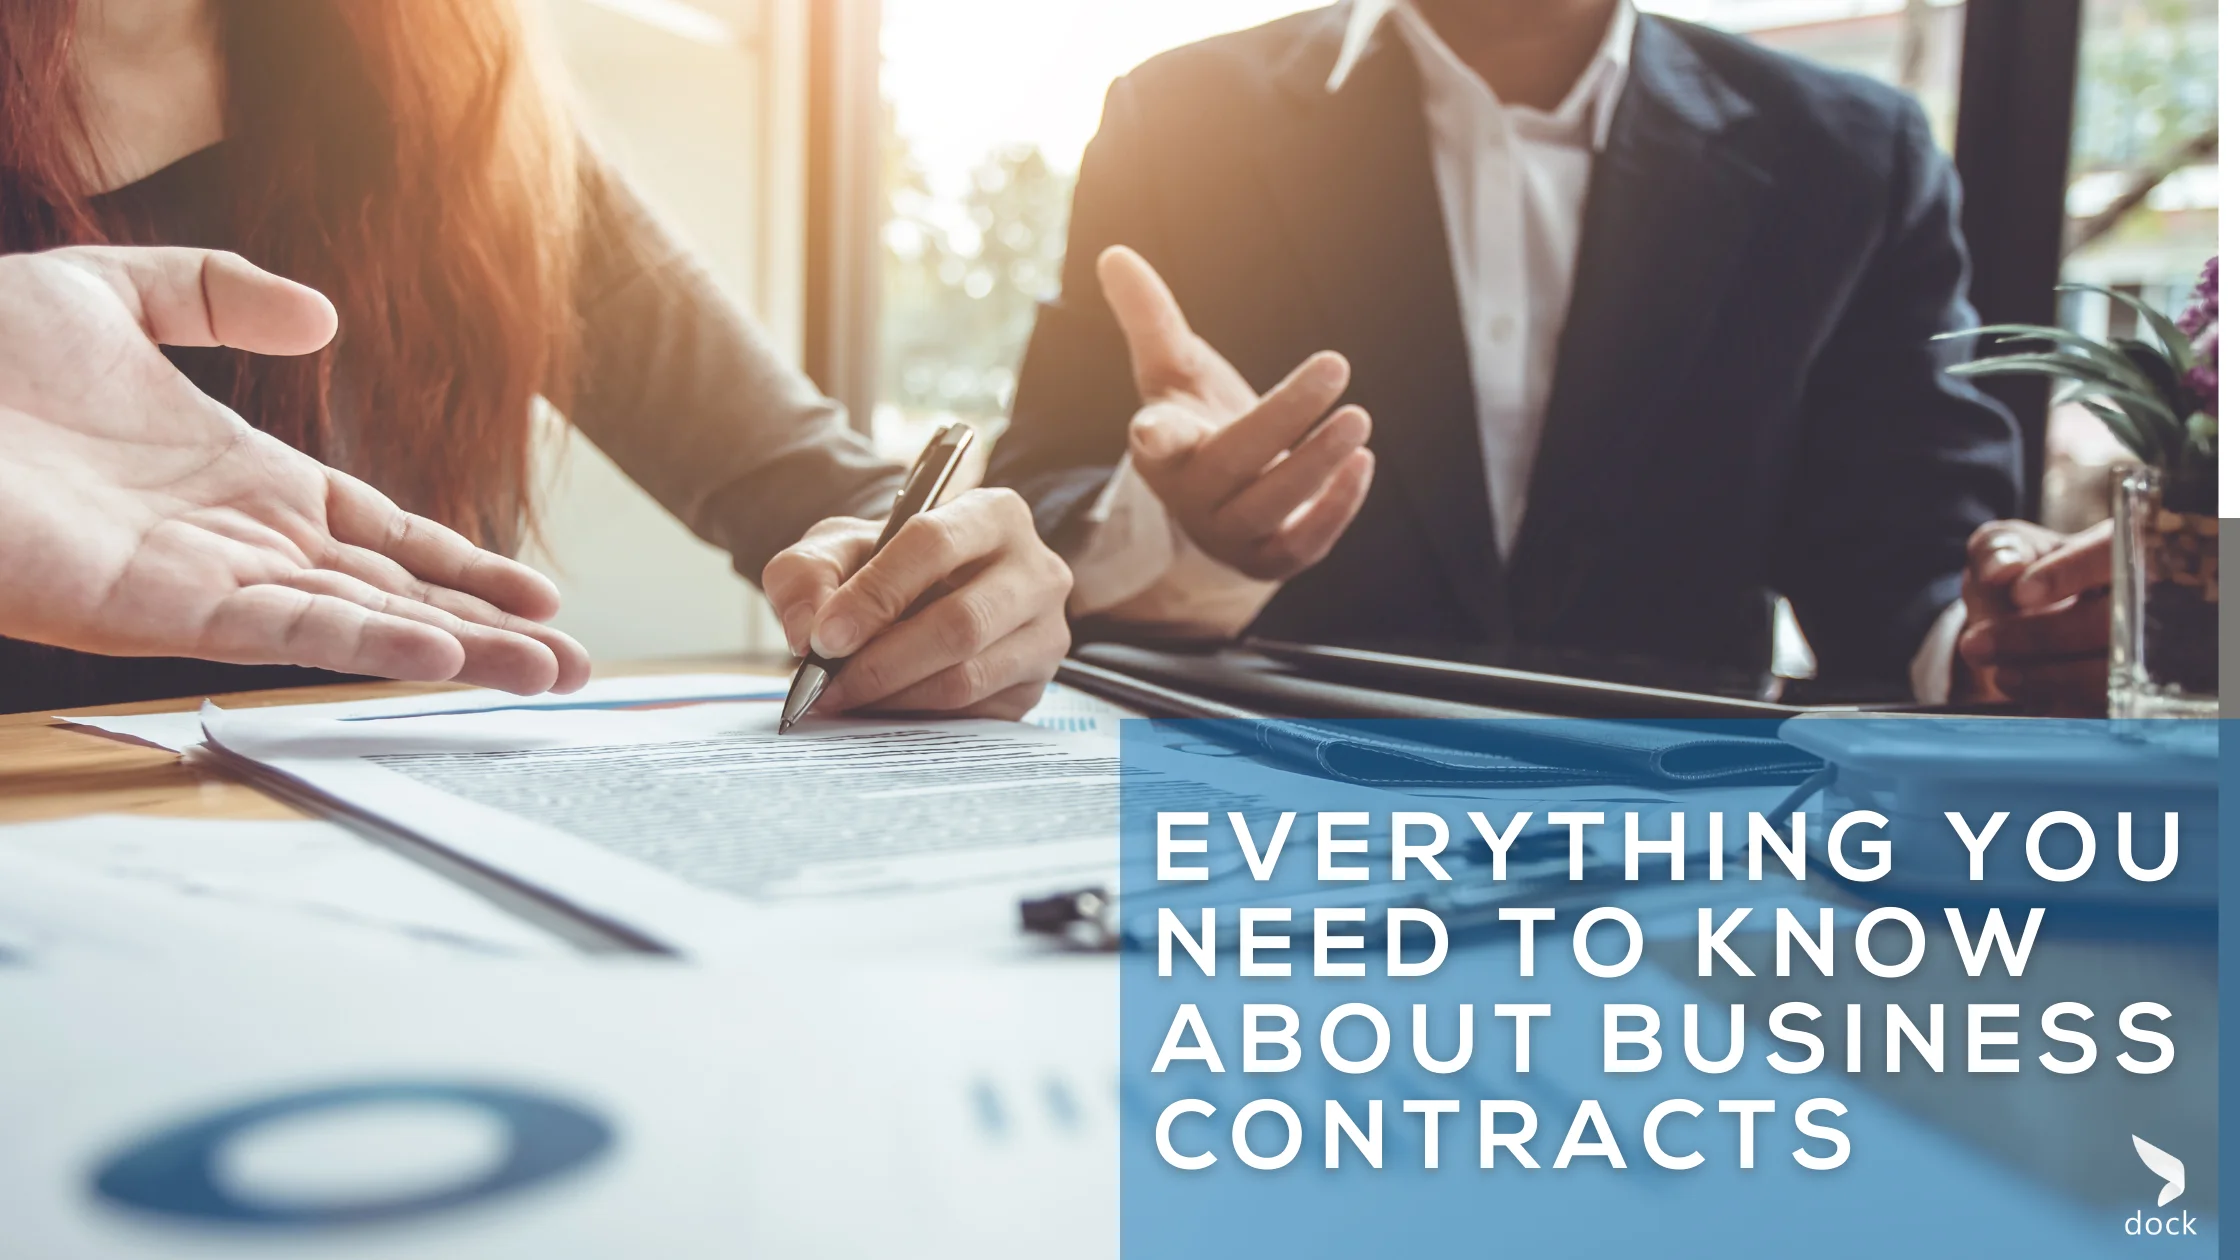 Everything you need to know about business contracts